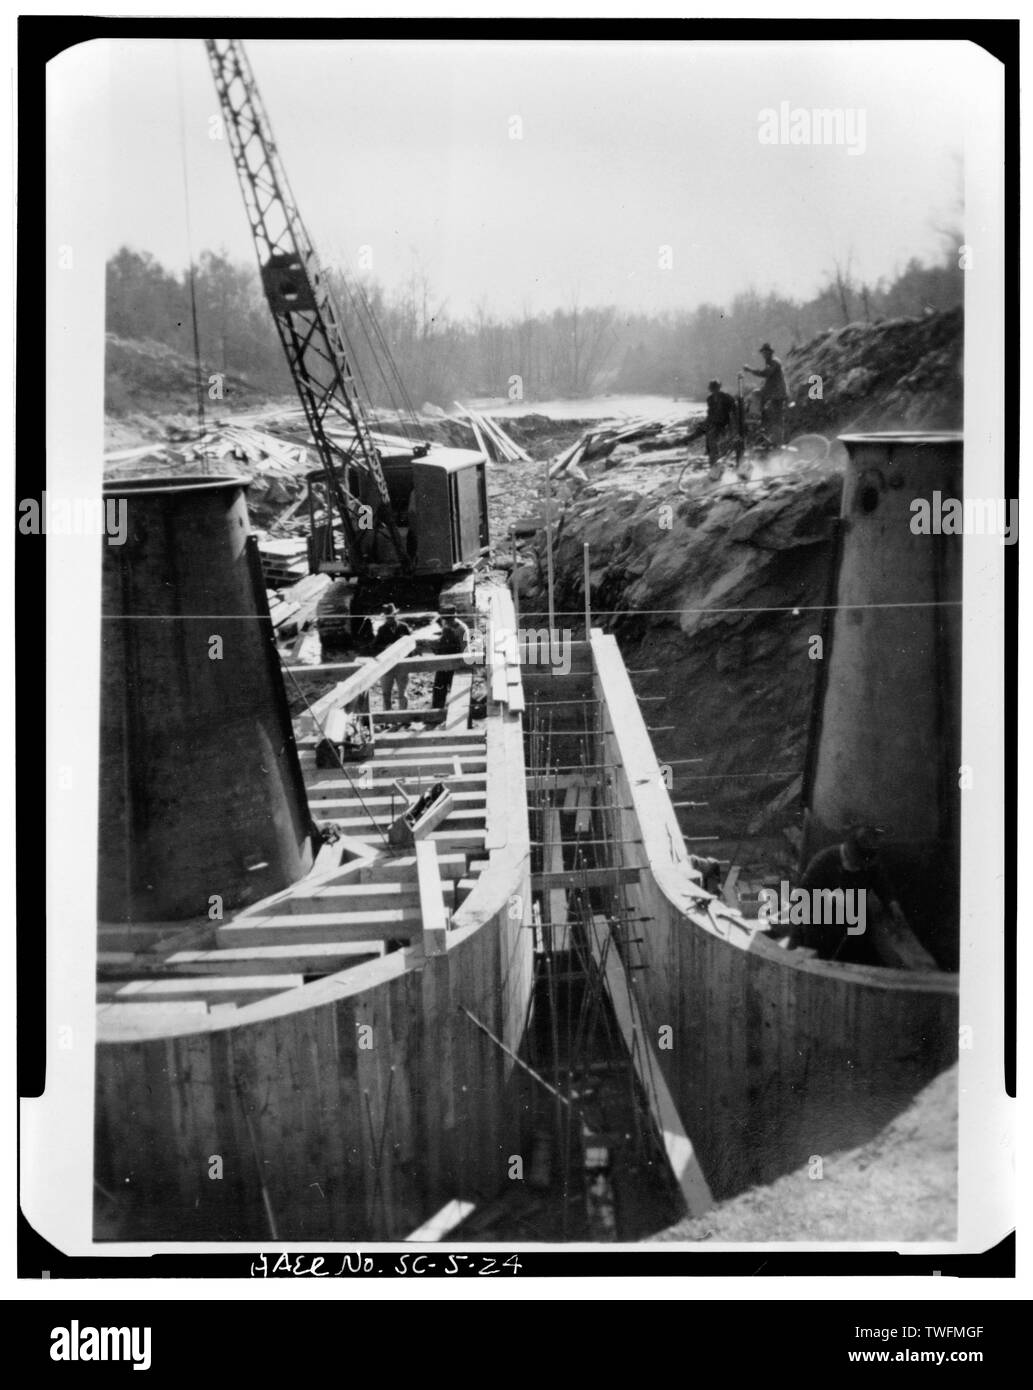 POWER PLANT FOUNDATION - Abbeville Hydroelectric Power Plant, State Highway 284 and County Road 72, Rocky River (historical), Abbeville County, SC; Abbeville Water and Electric Plant Company; Pennell, James Roy; White, W H; Abbeville Power Company Incorporated; D.M. Rickenbacker Construction Company; Townsend, C P; Wideman and Singleton; Britton, John B; S. Morgan Smith Company; Woodward Governor Company; Bethlehem Steel Company; Westinghouse Corporation; Bush Sulzer Brothers Company; Mark Brothers; Cary, Brian, transmitter Stock Photo